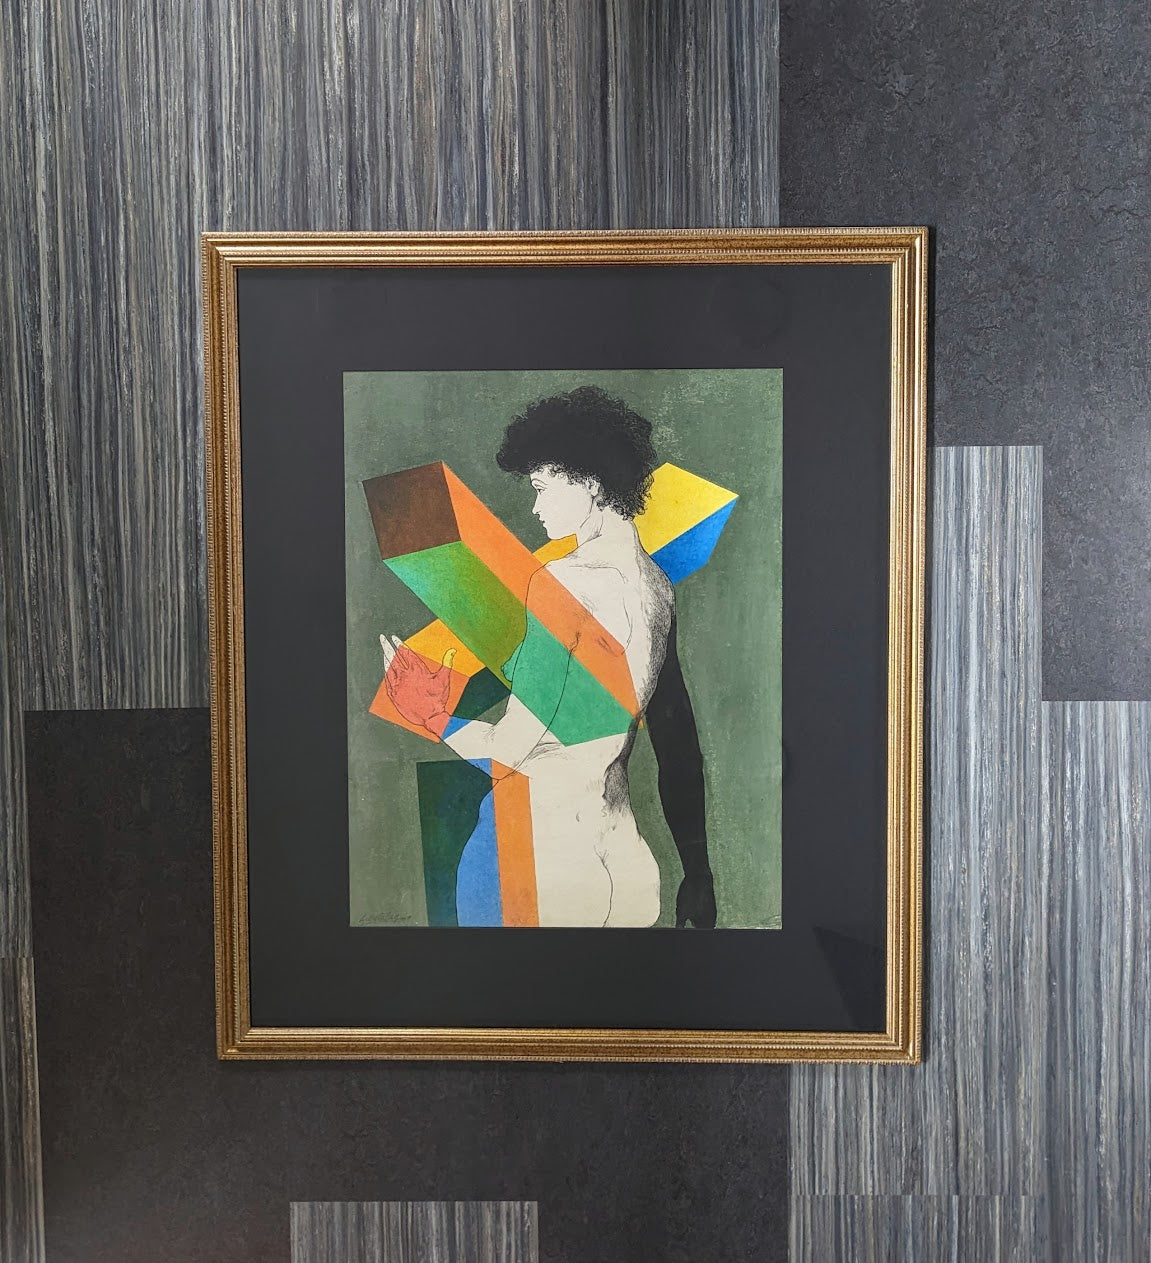 RARE Original Laszlo Matulay Painting "Geometric Nude" | Mixed Media on Paper Signed & Dated (1969)